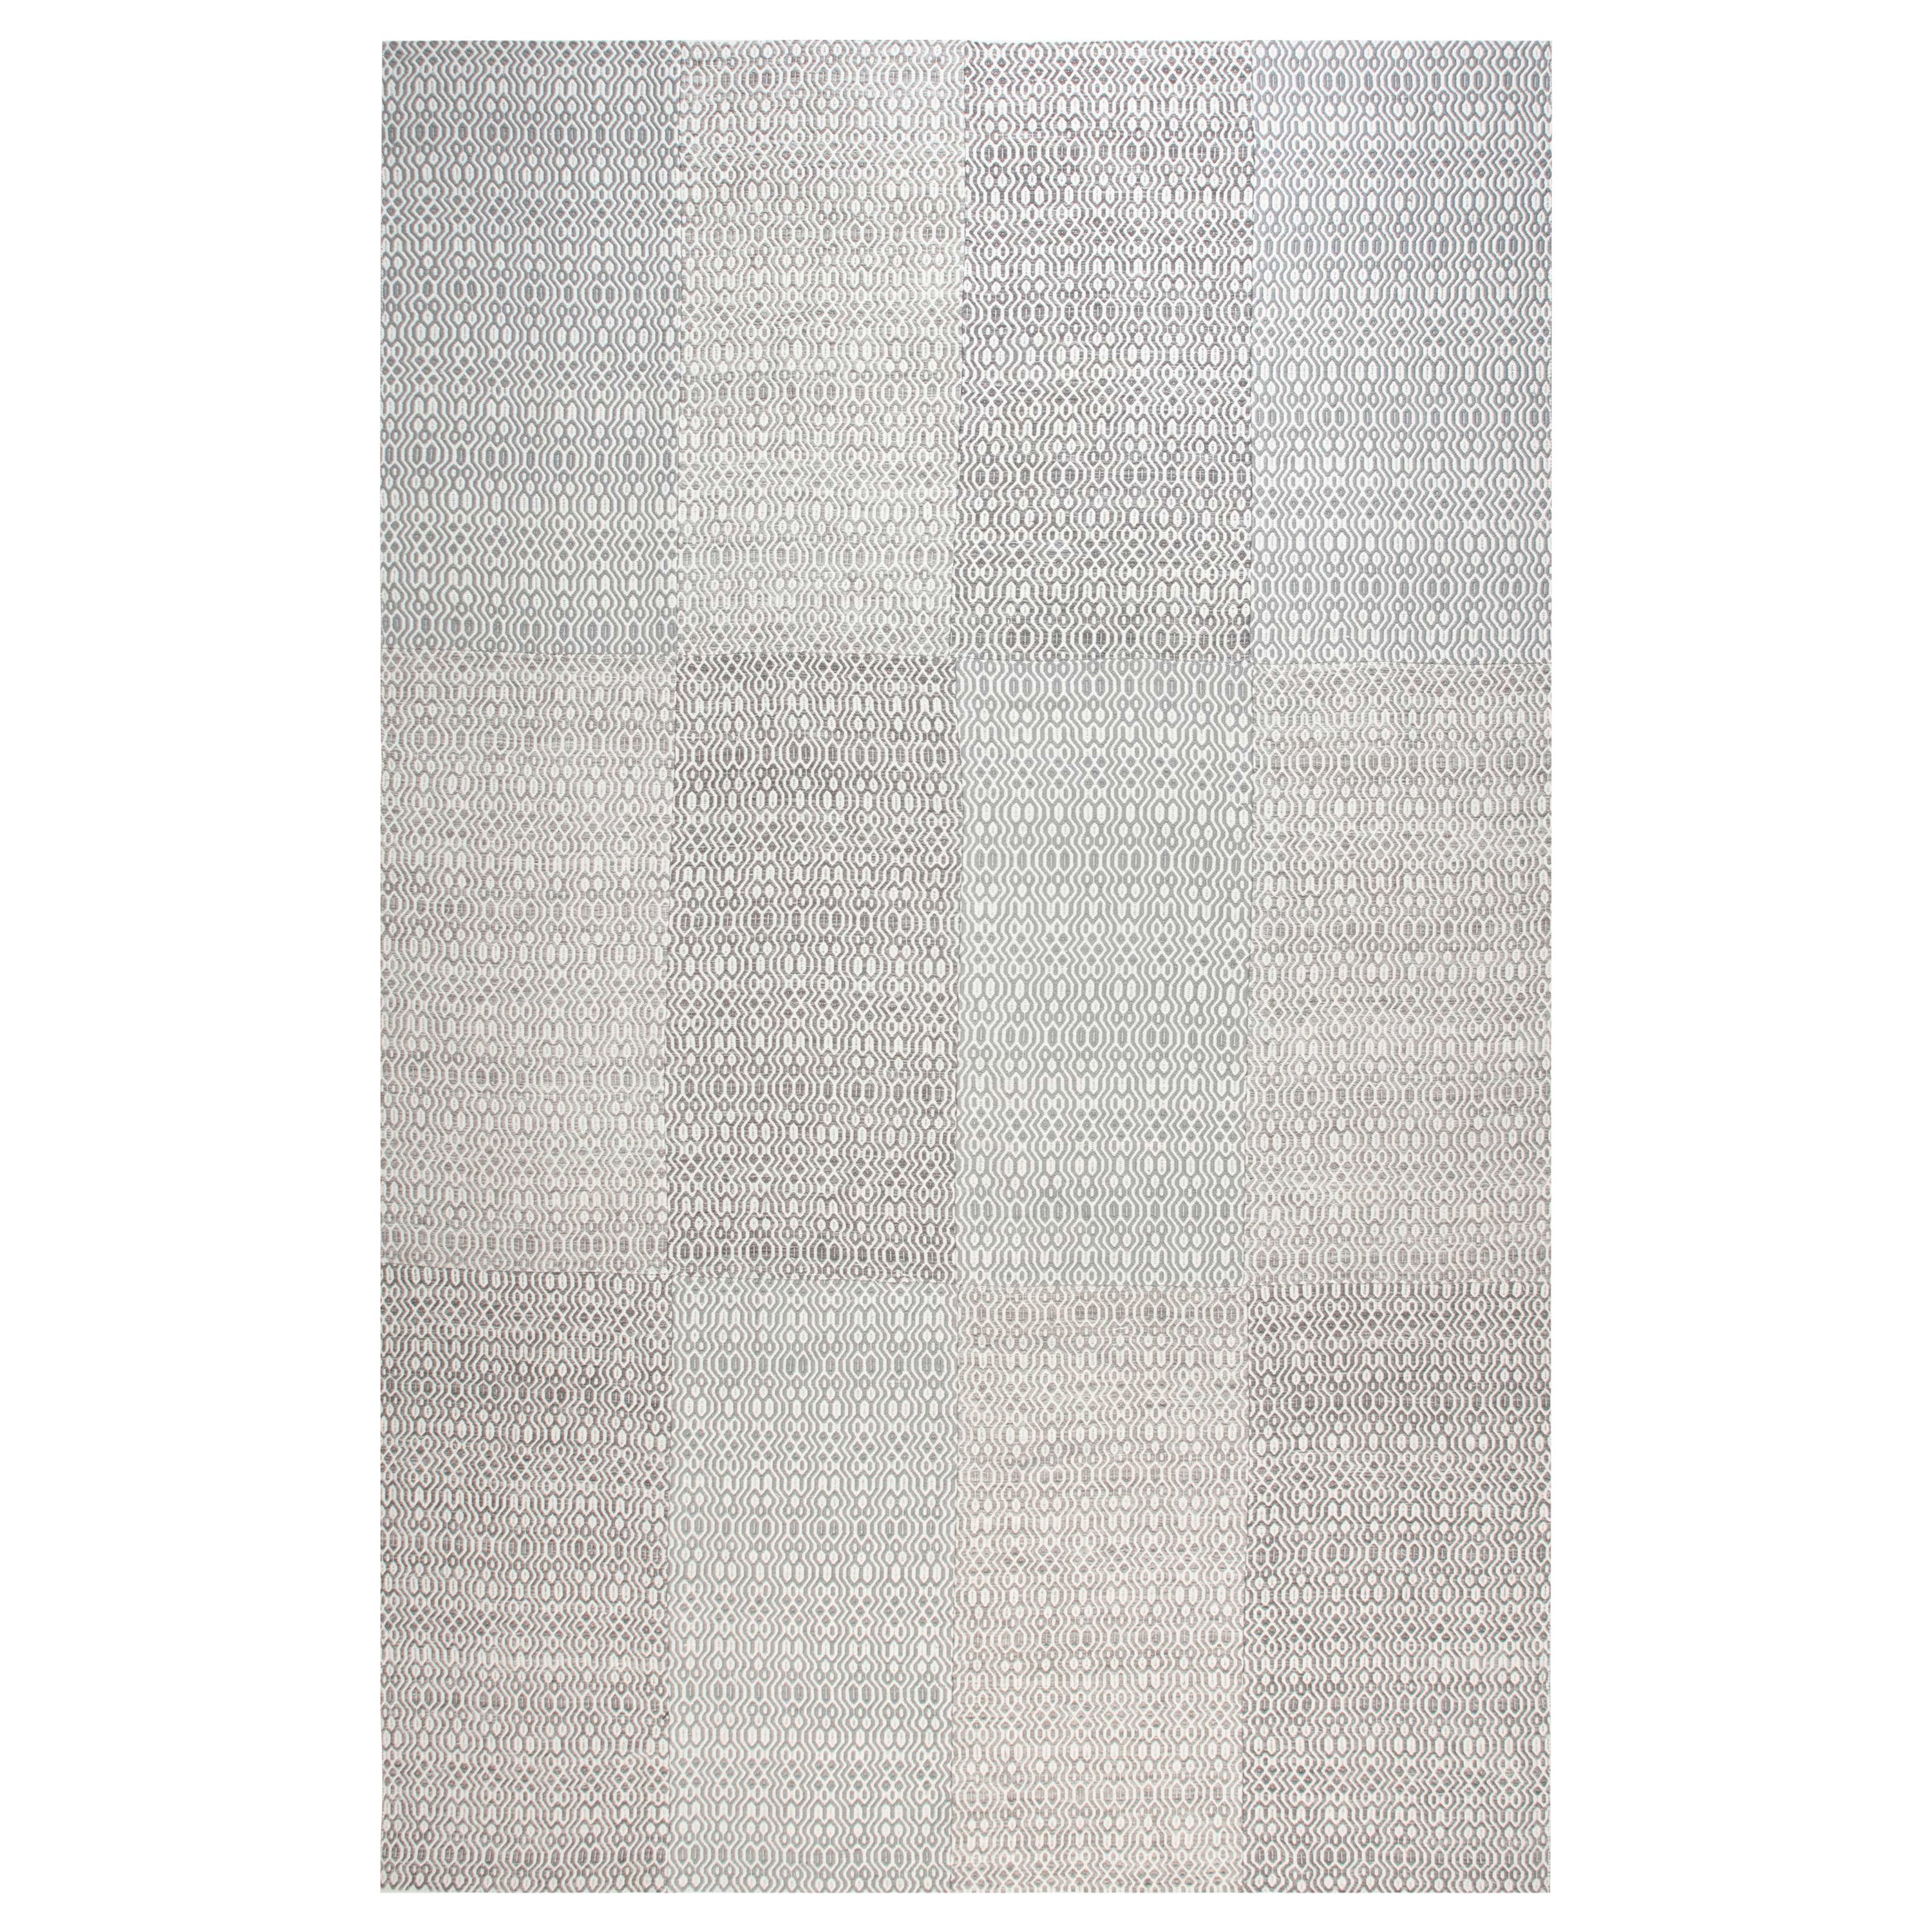 Contemporary White and Gray Flat-Weave Wool Rug by Doris Leslie Blau